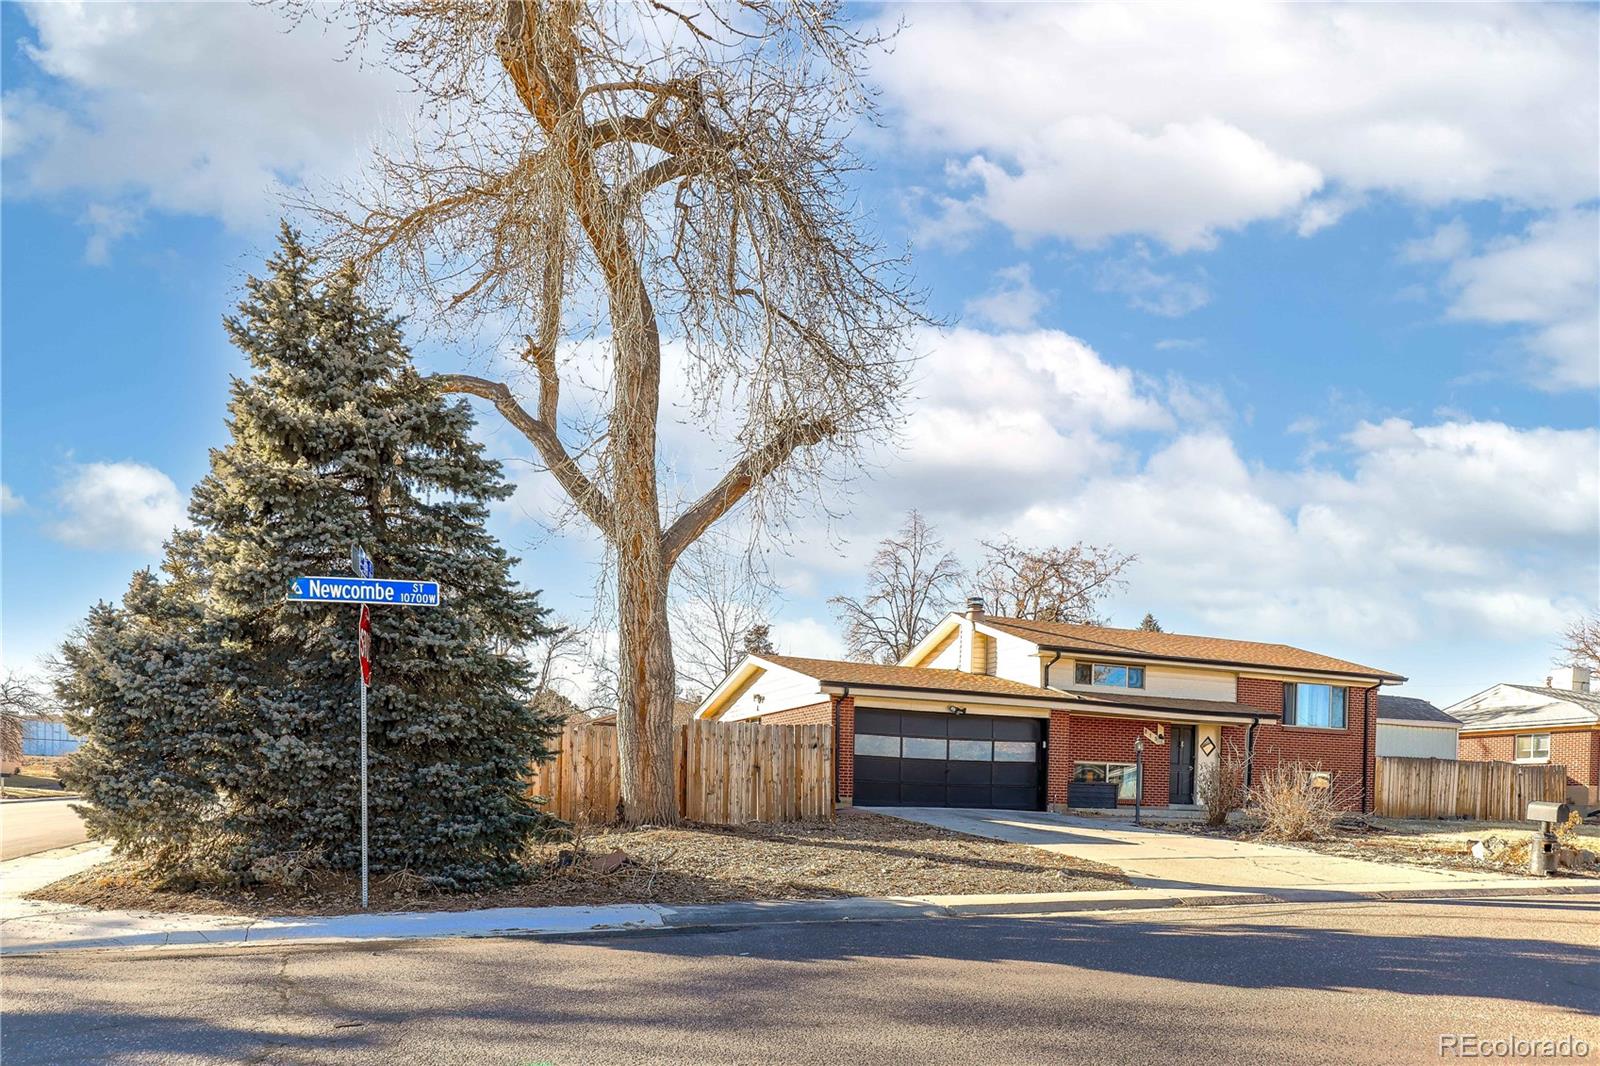 Report Image for 815  Newcombe Street,Lakewood, Colorado